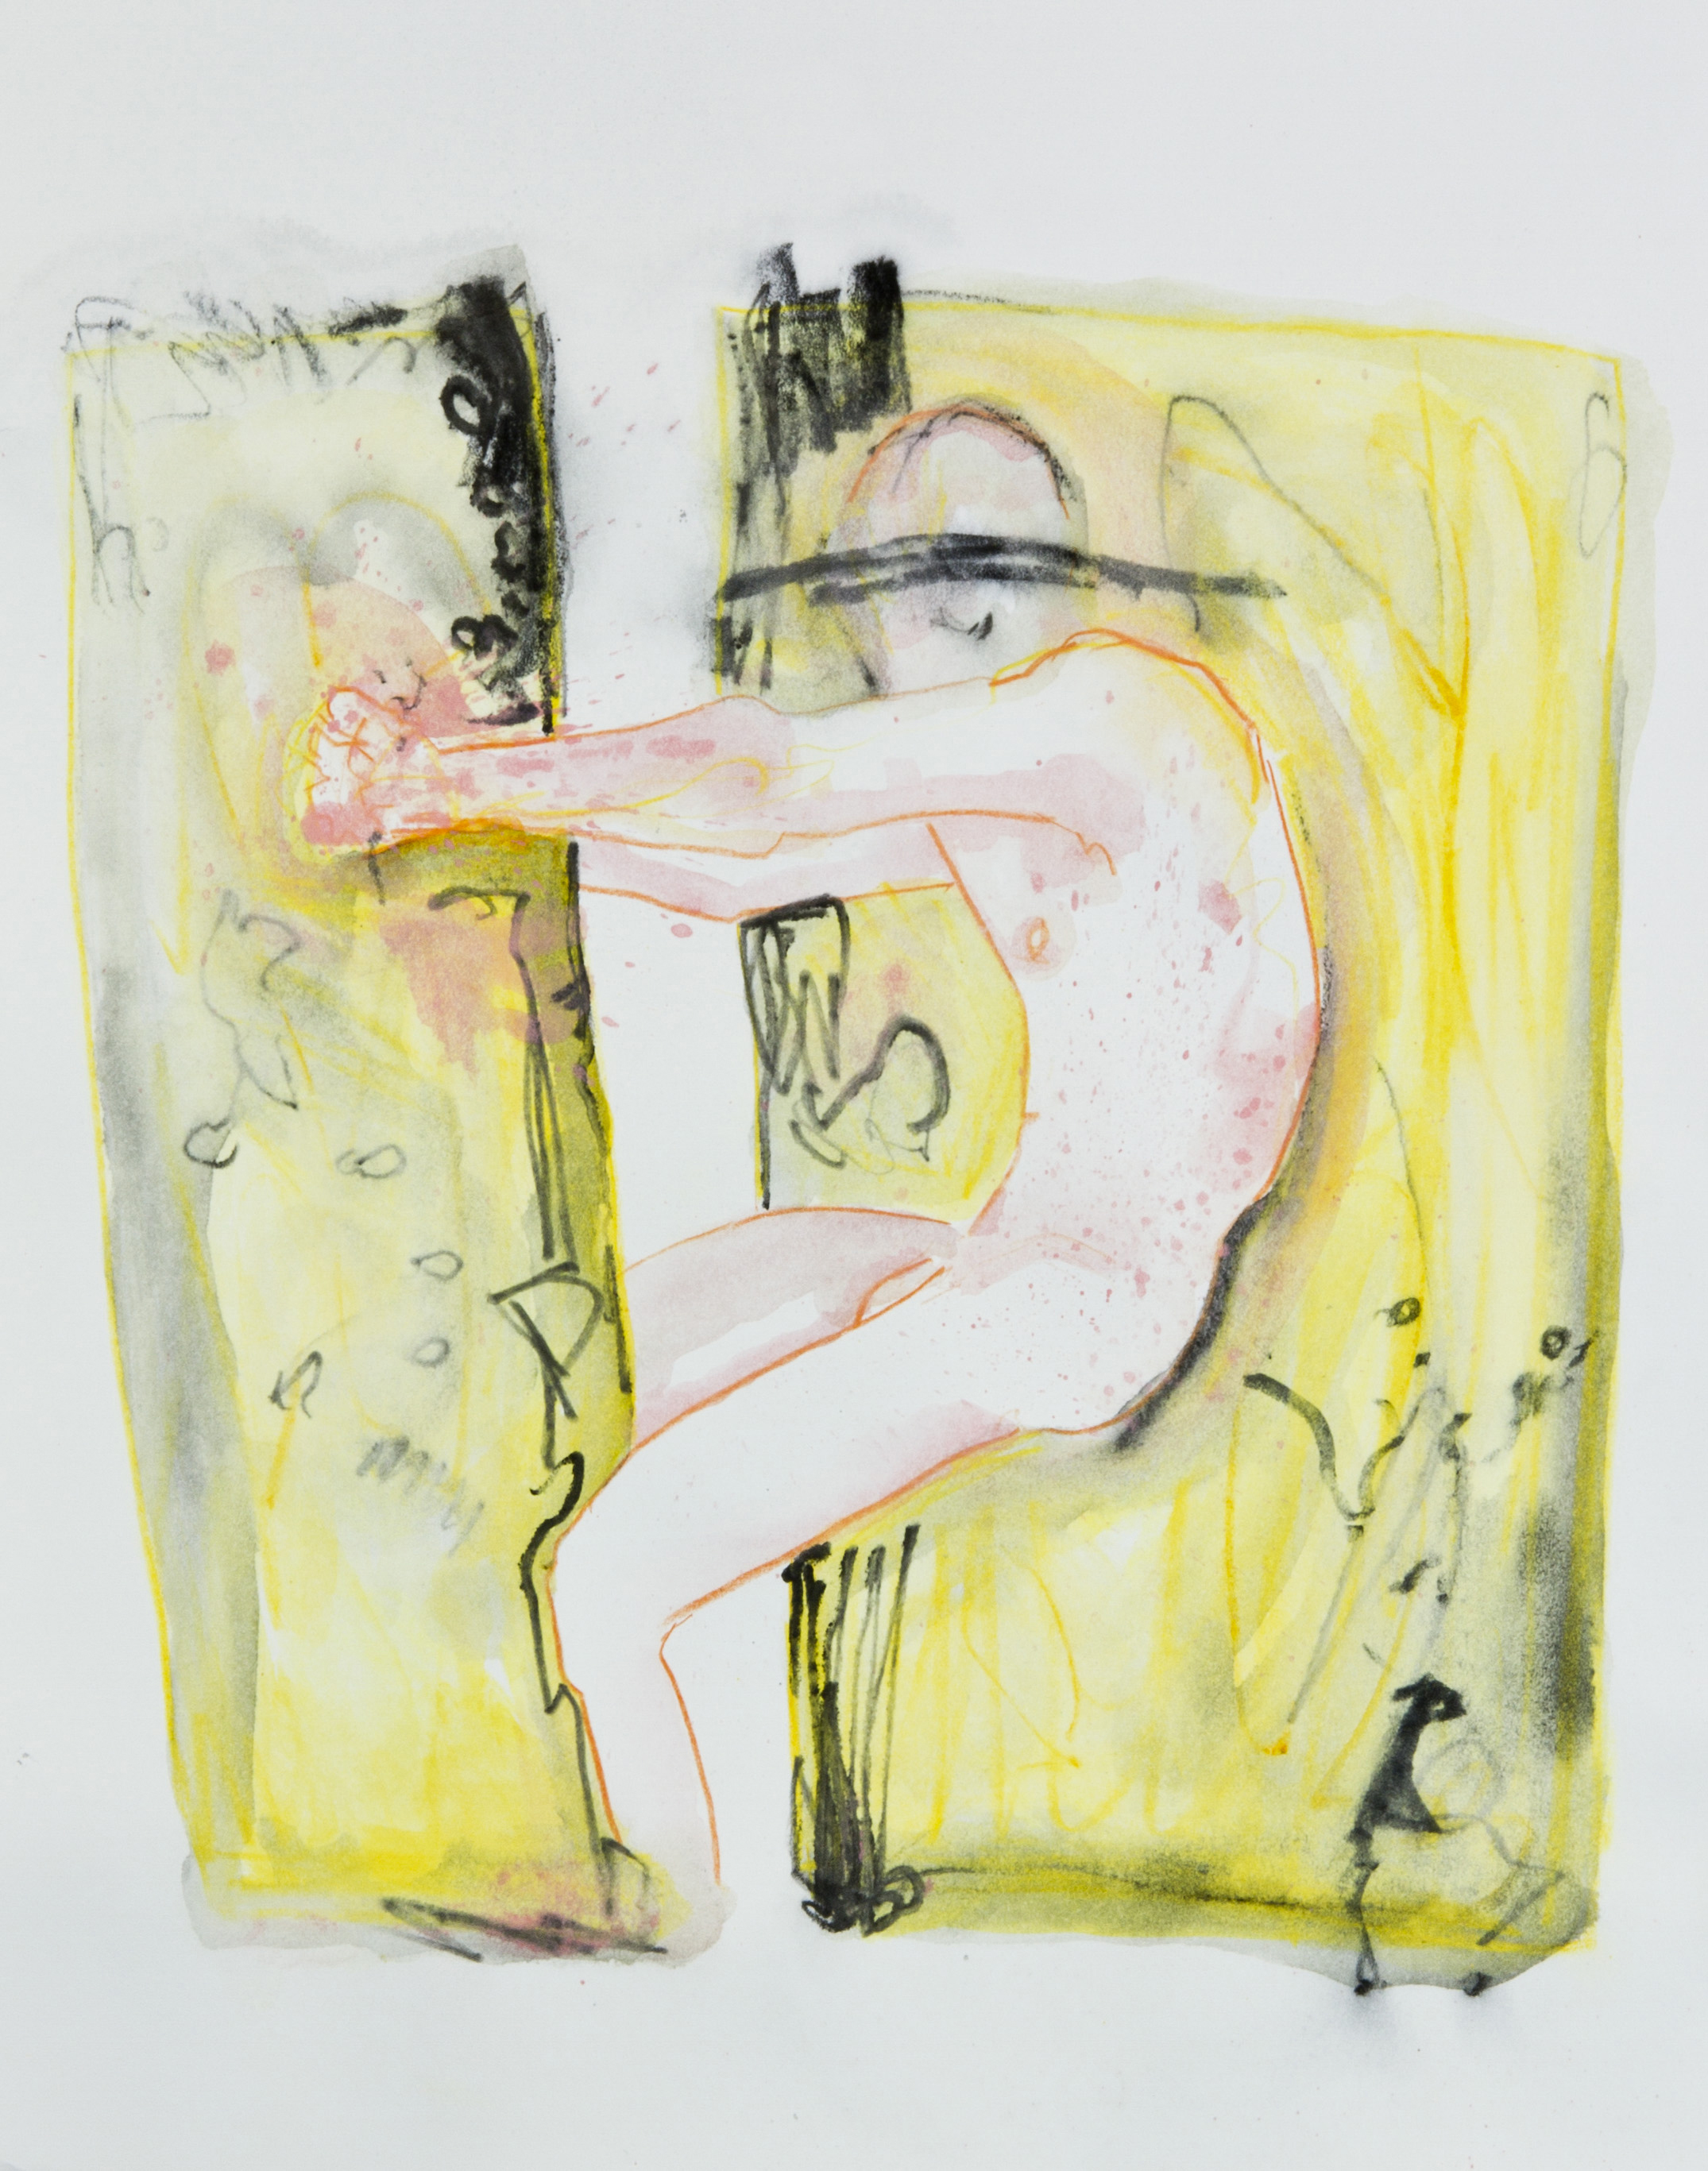 Two Yellow Pools, 2013, graphite, crayon and watercolor pencil on paper, 11x14 inches